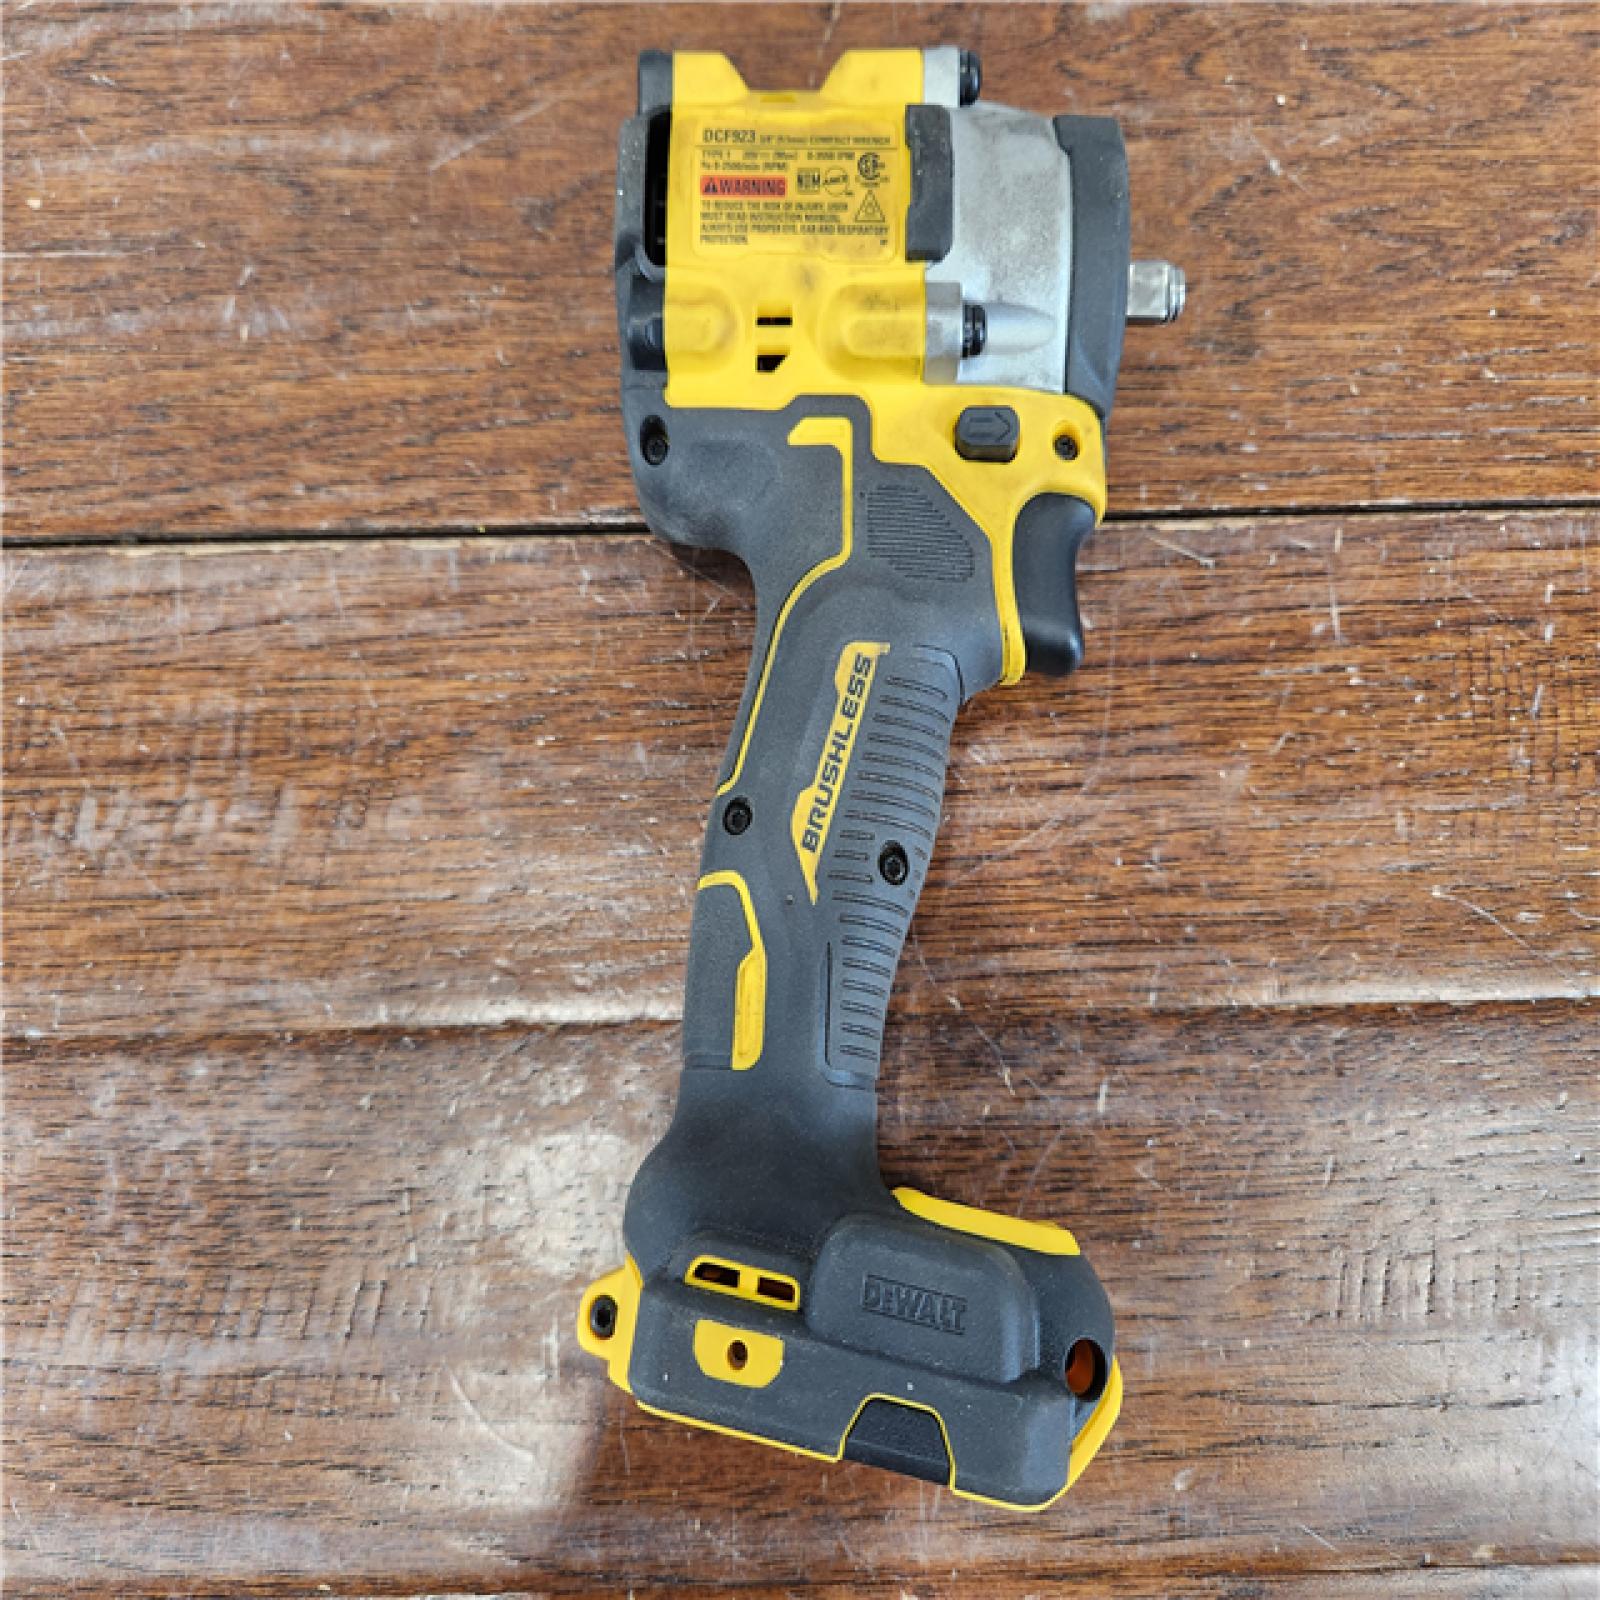 AS-IS DeWalt 20V MAX ATOMIC Cordless Brushless 3/8 in. Compact Impact Wrench (Tool Only)